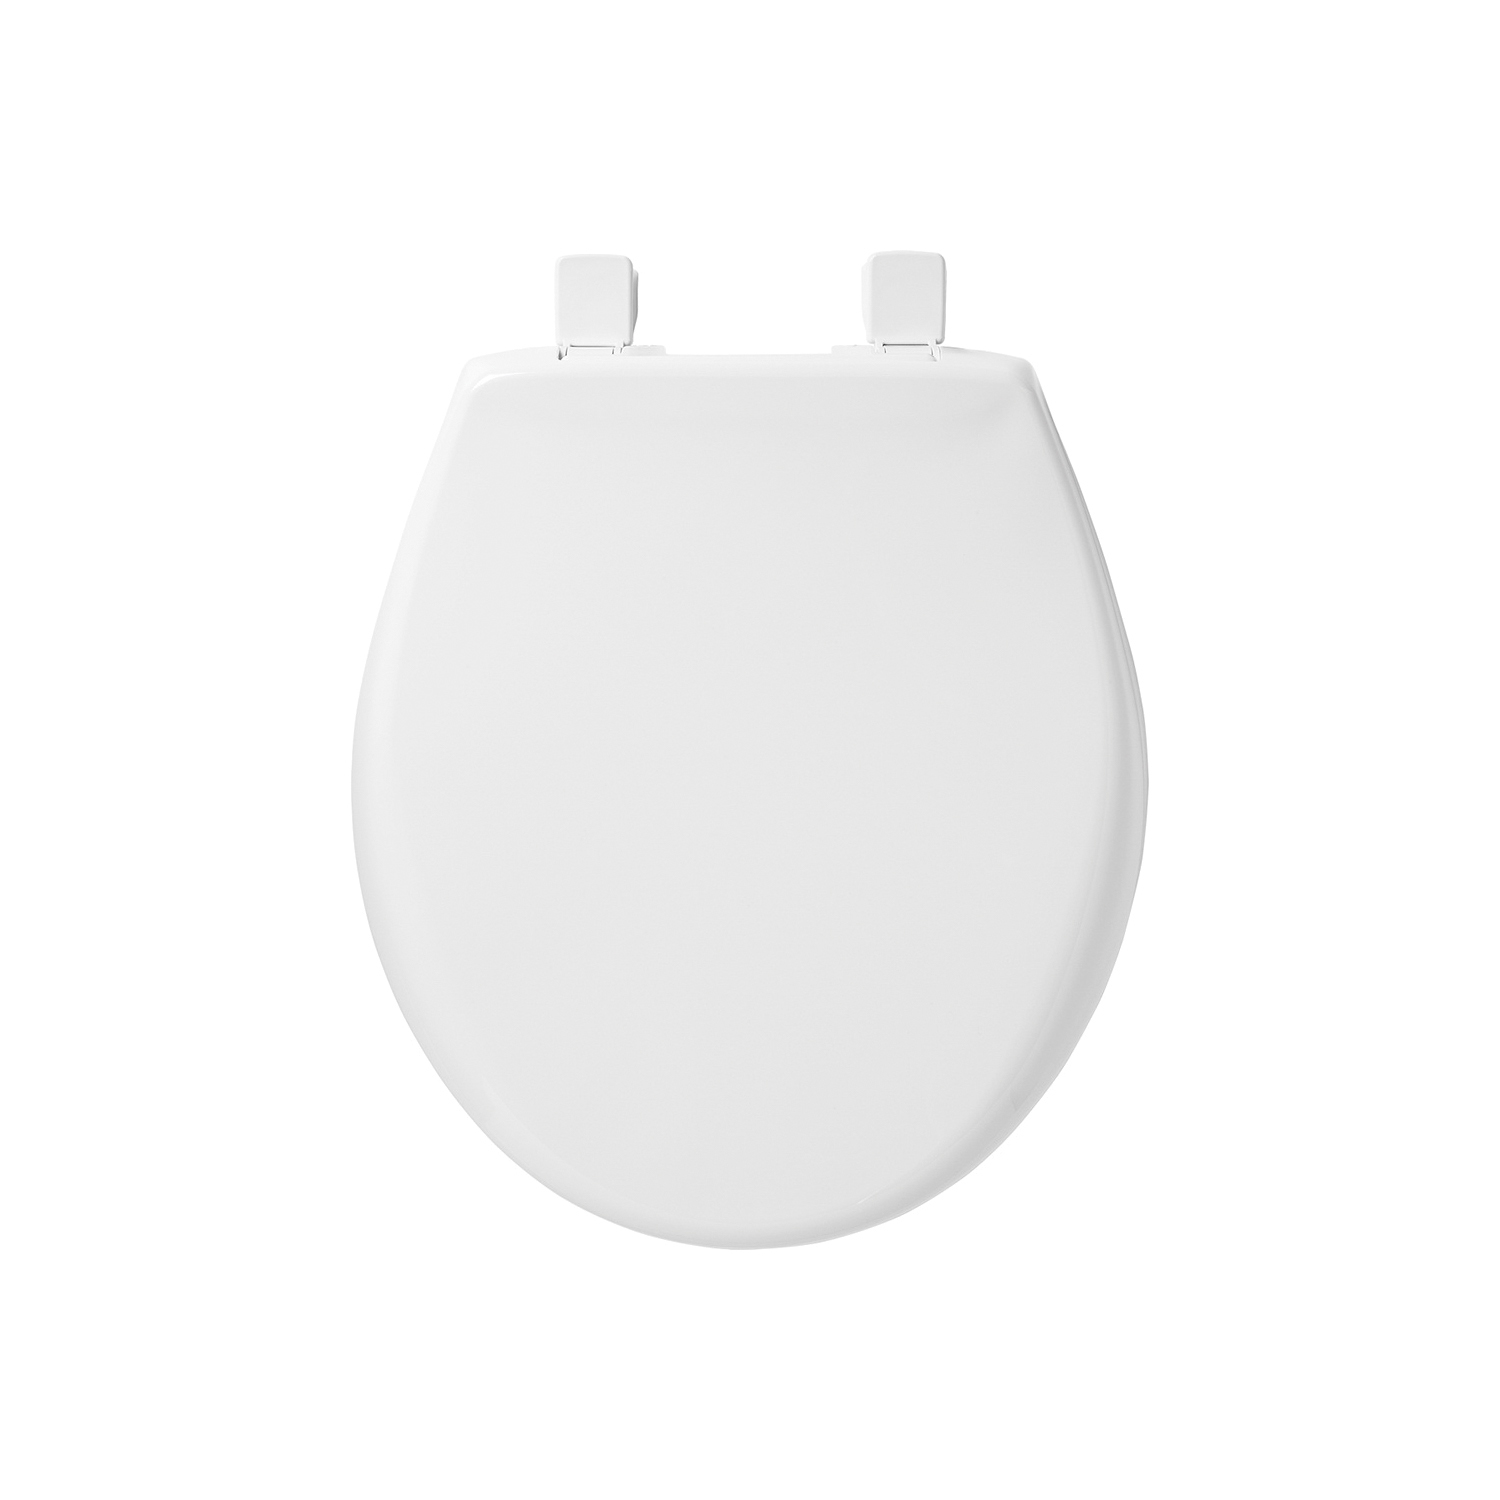 Bemis® AFFINITY™ 200E3 000 Toilet Seat With Cover, Round Bowl, Closed Front, Plastic, White, Easy Clean & Change® Adjustable Hinge, Domestic